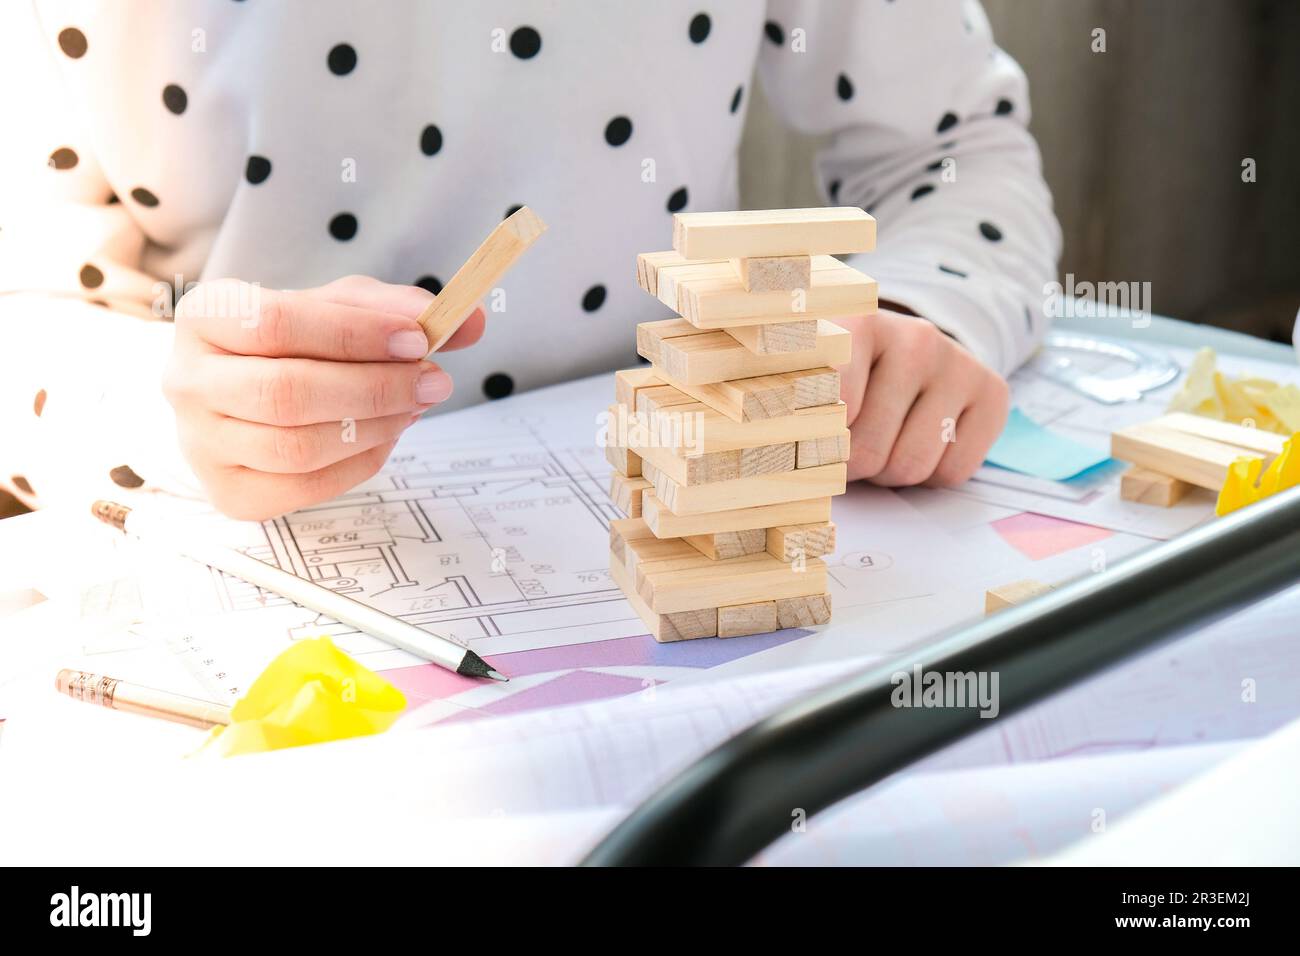 Architect designer Interior creative working hand playing a block wood game on desk architectural plan of the house, a color pal Stock Photo